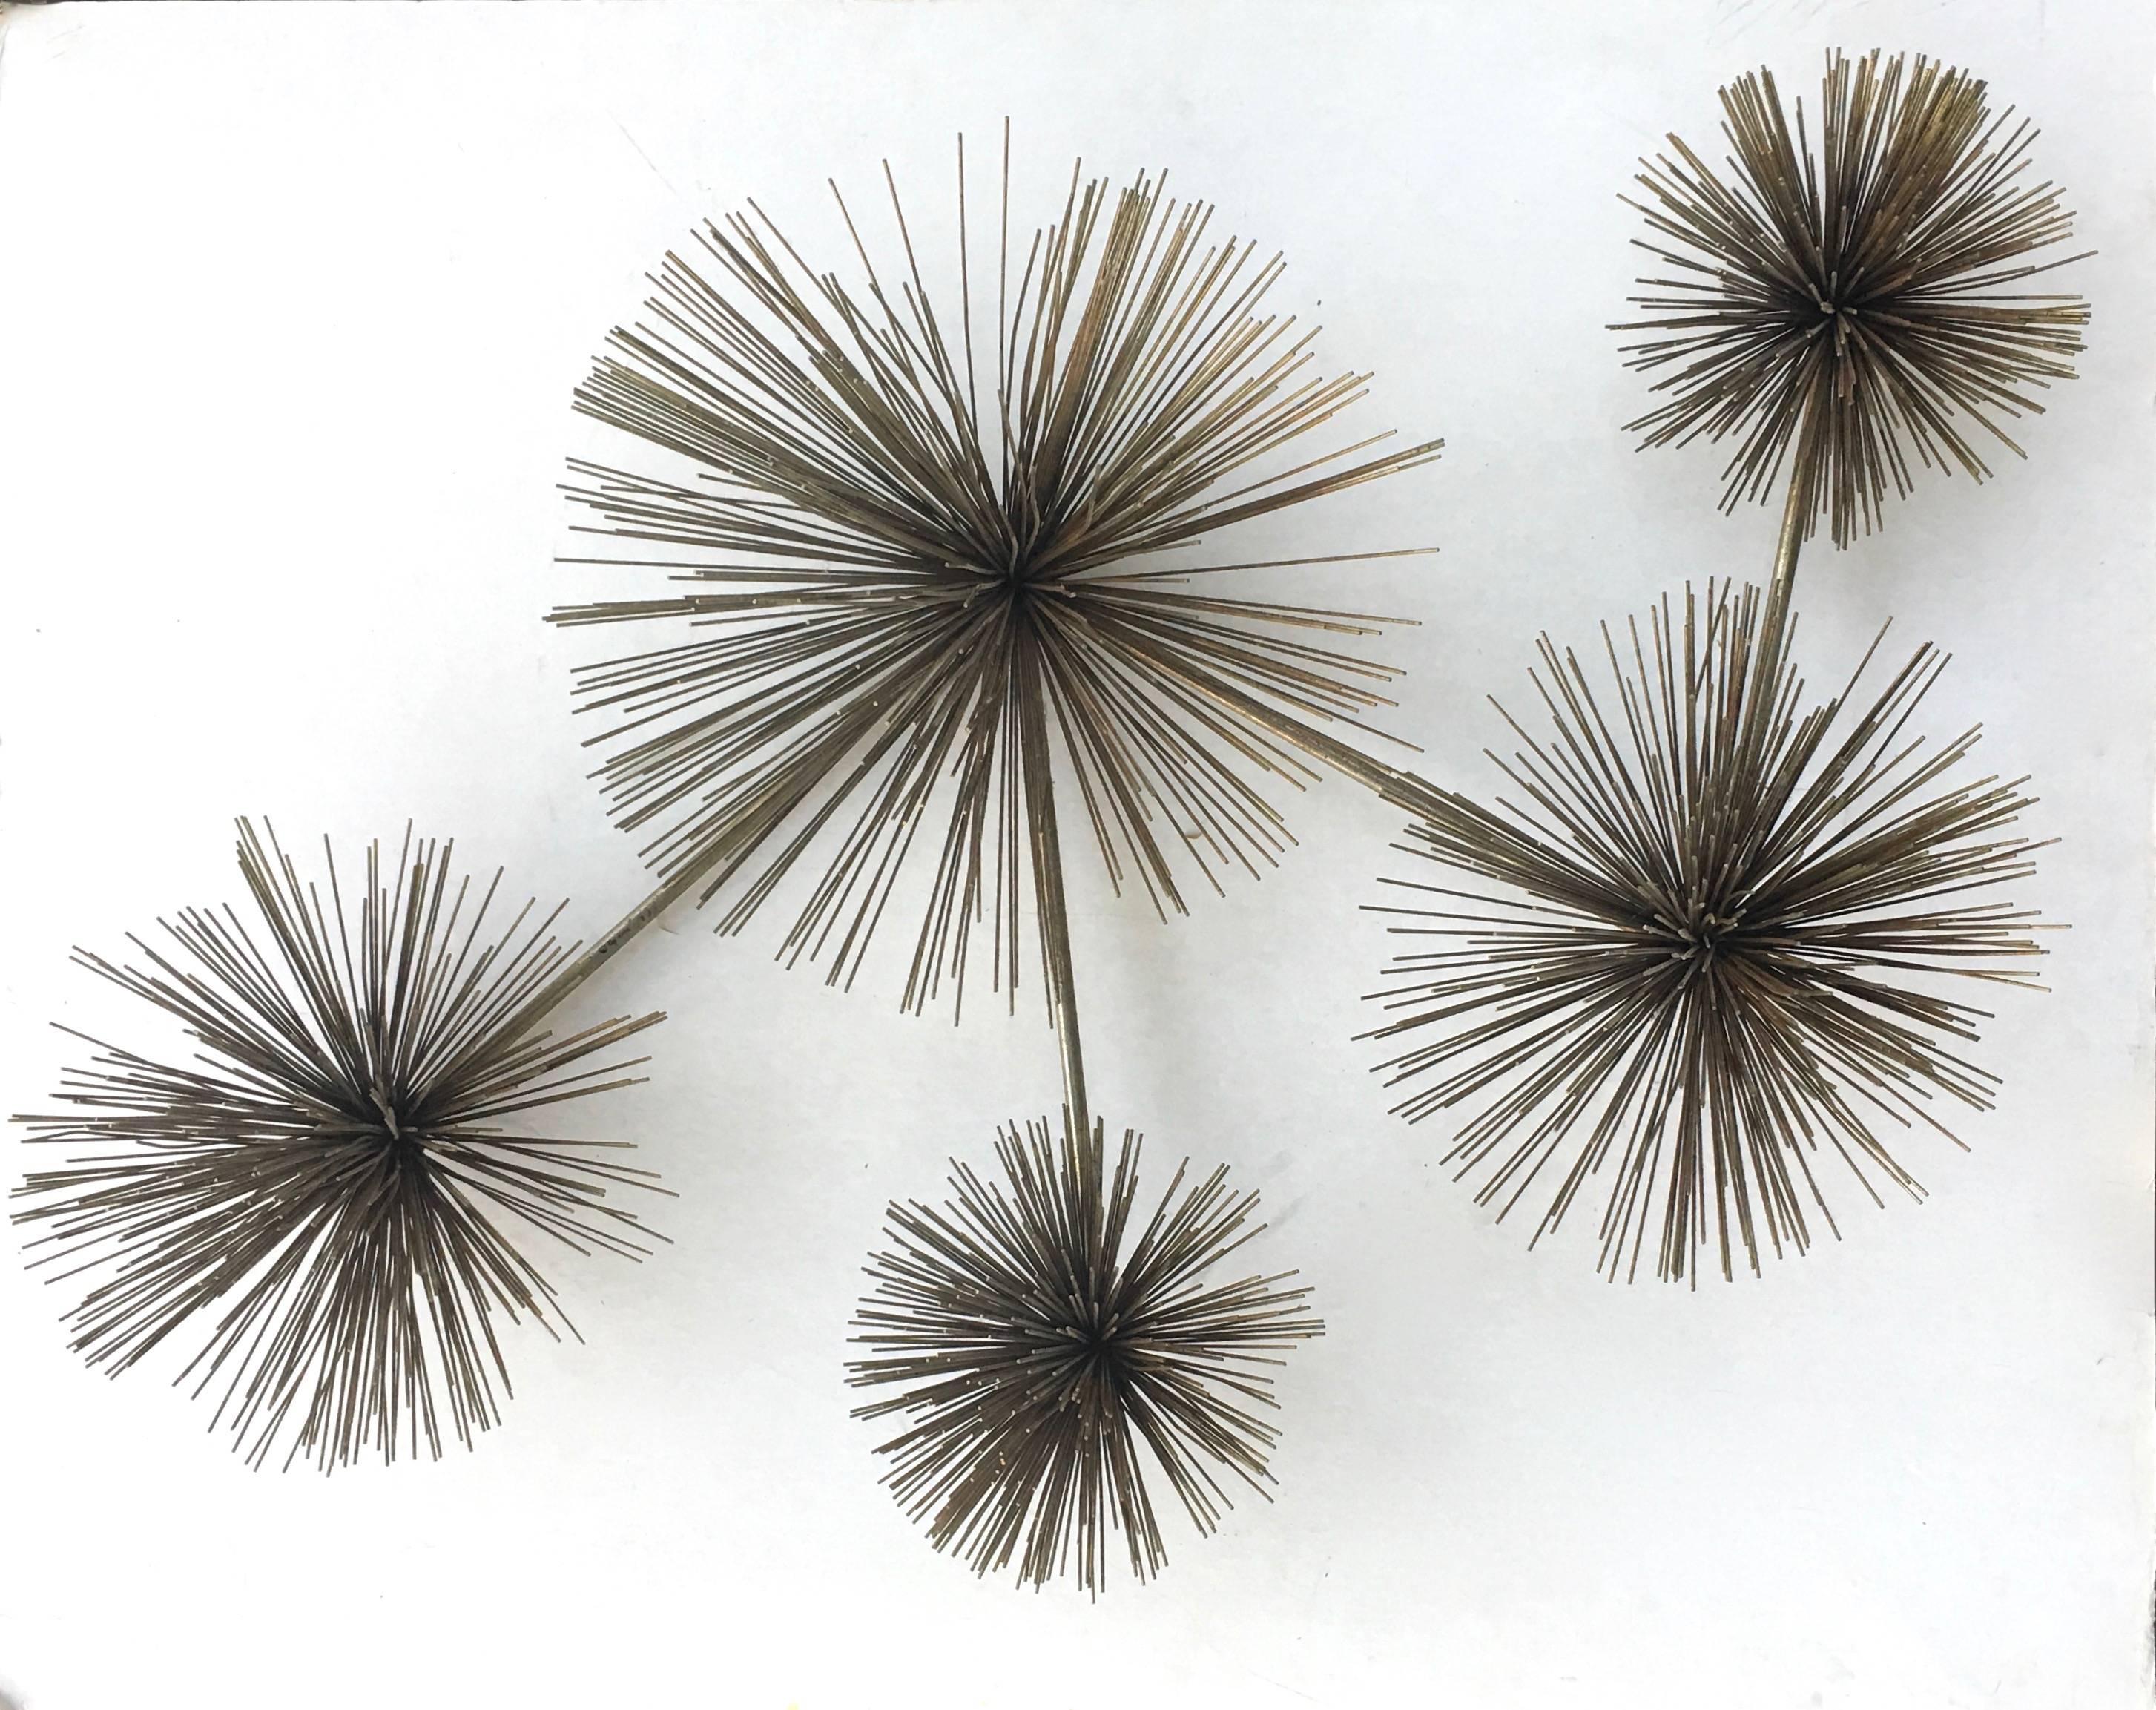 Curtis Jere.
Pom Poms.
1960s.
Welded metal.
Manufactured by Artisan House.
Measures: 25 ins. high x 37 ins. wide x 10 ins. deep.
Very good original condition.